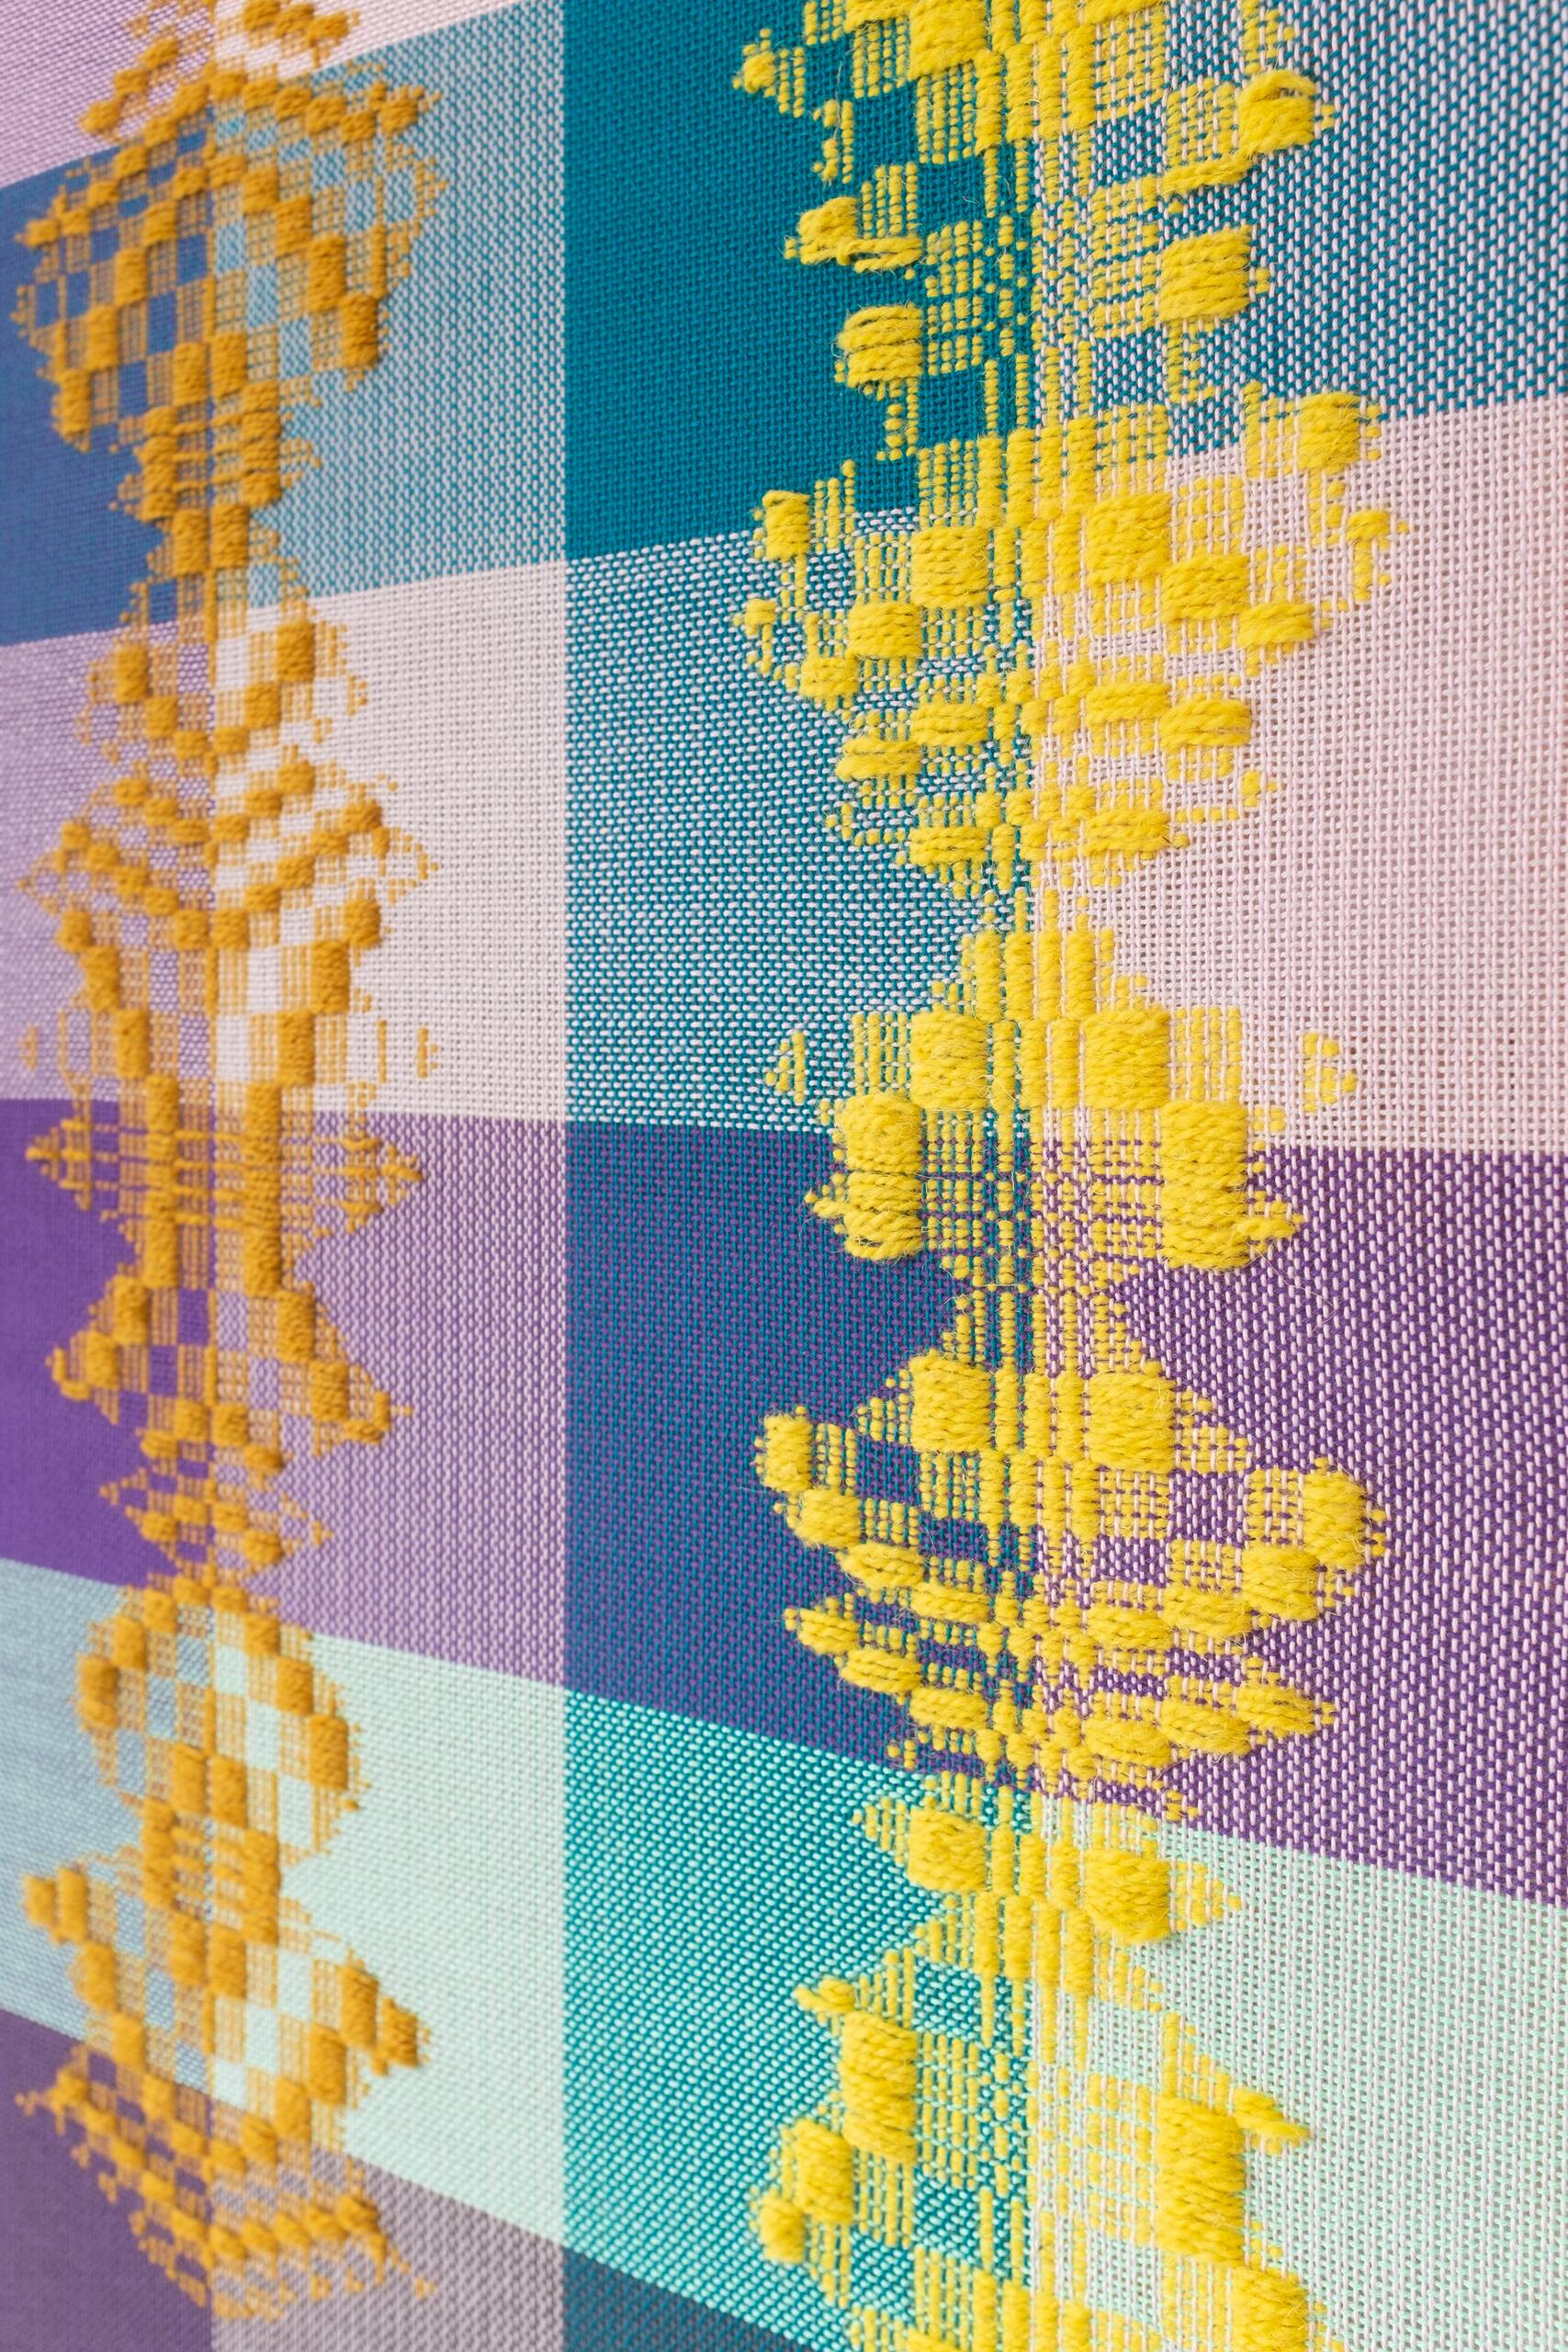 Three beings [blue-bronze-yellow on high-contrast ground], Hand-woven cotton and wool yarn, 2022